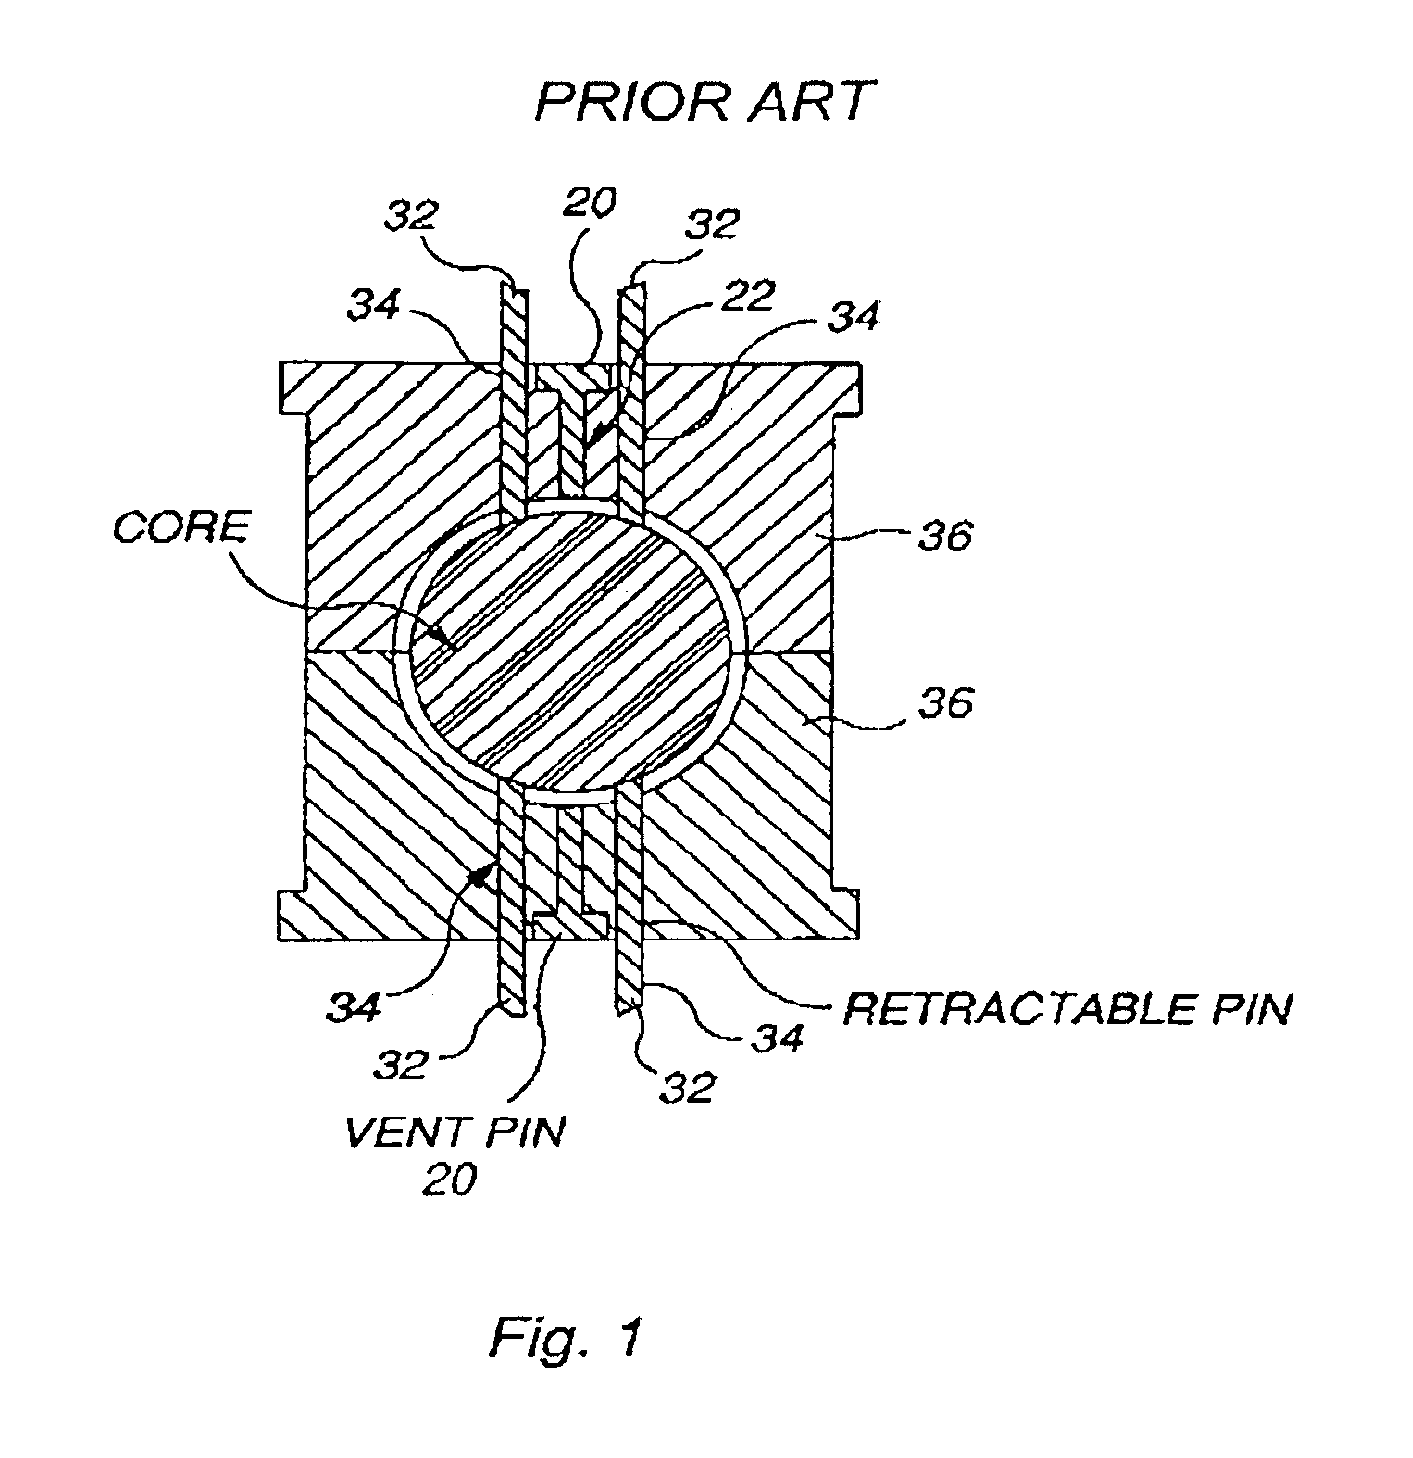 Split vent pin for injection molding